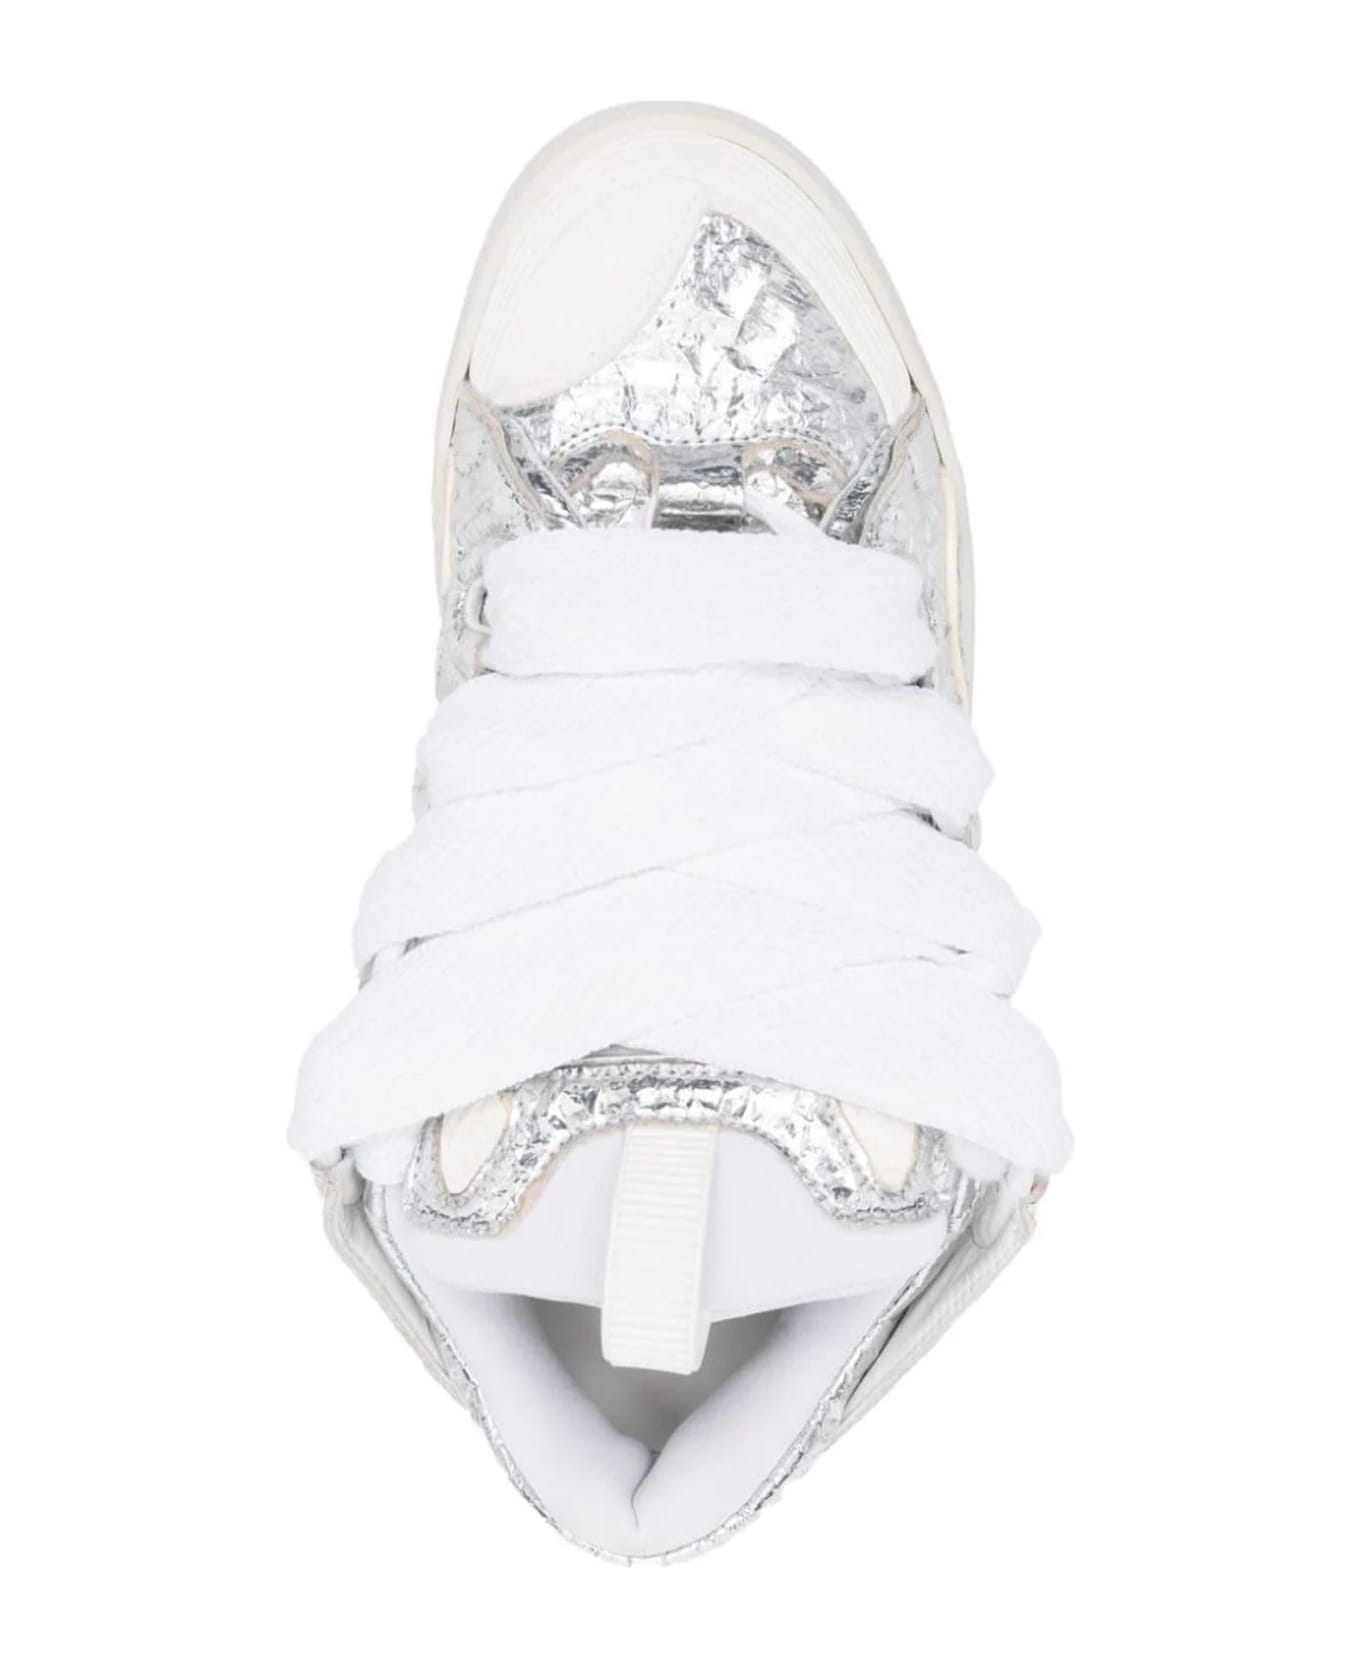 Lanvin Curb Sneakers In Crinkled Metallic Leather - Silver